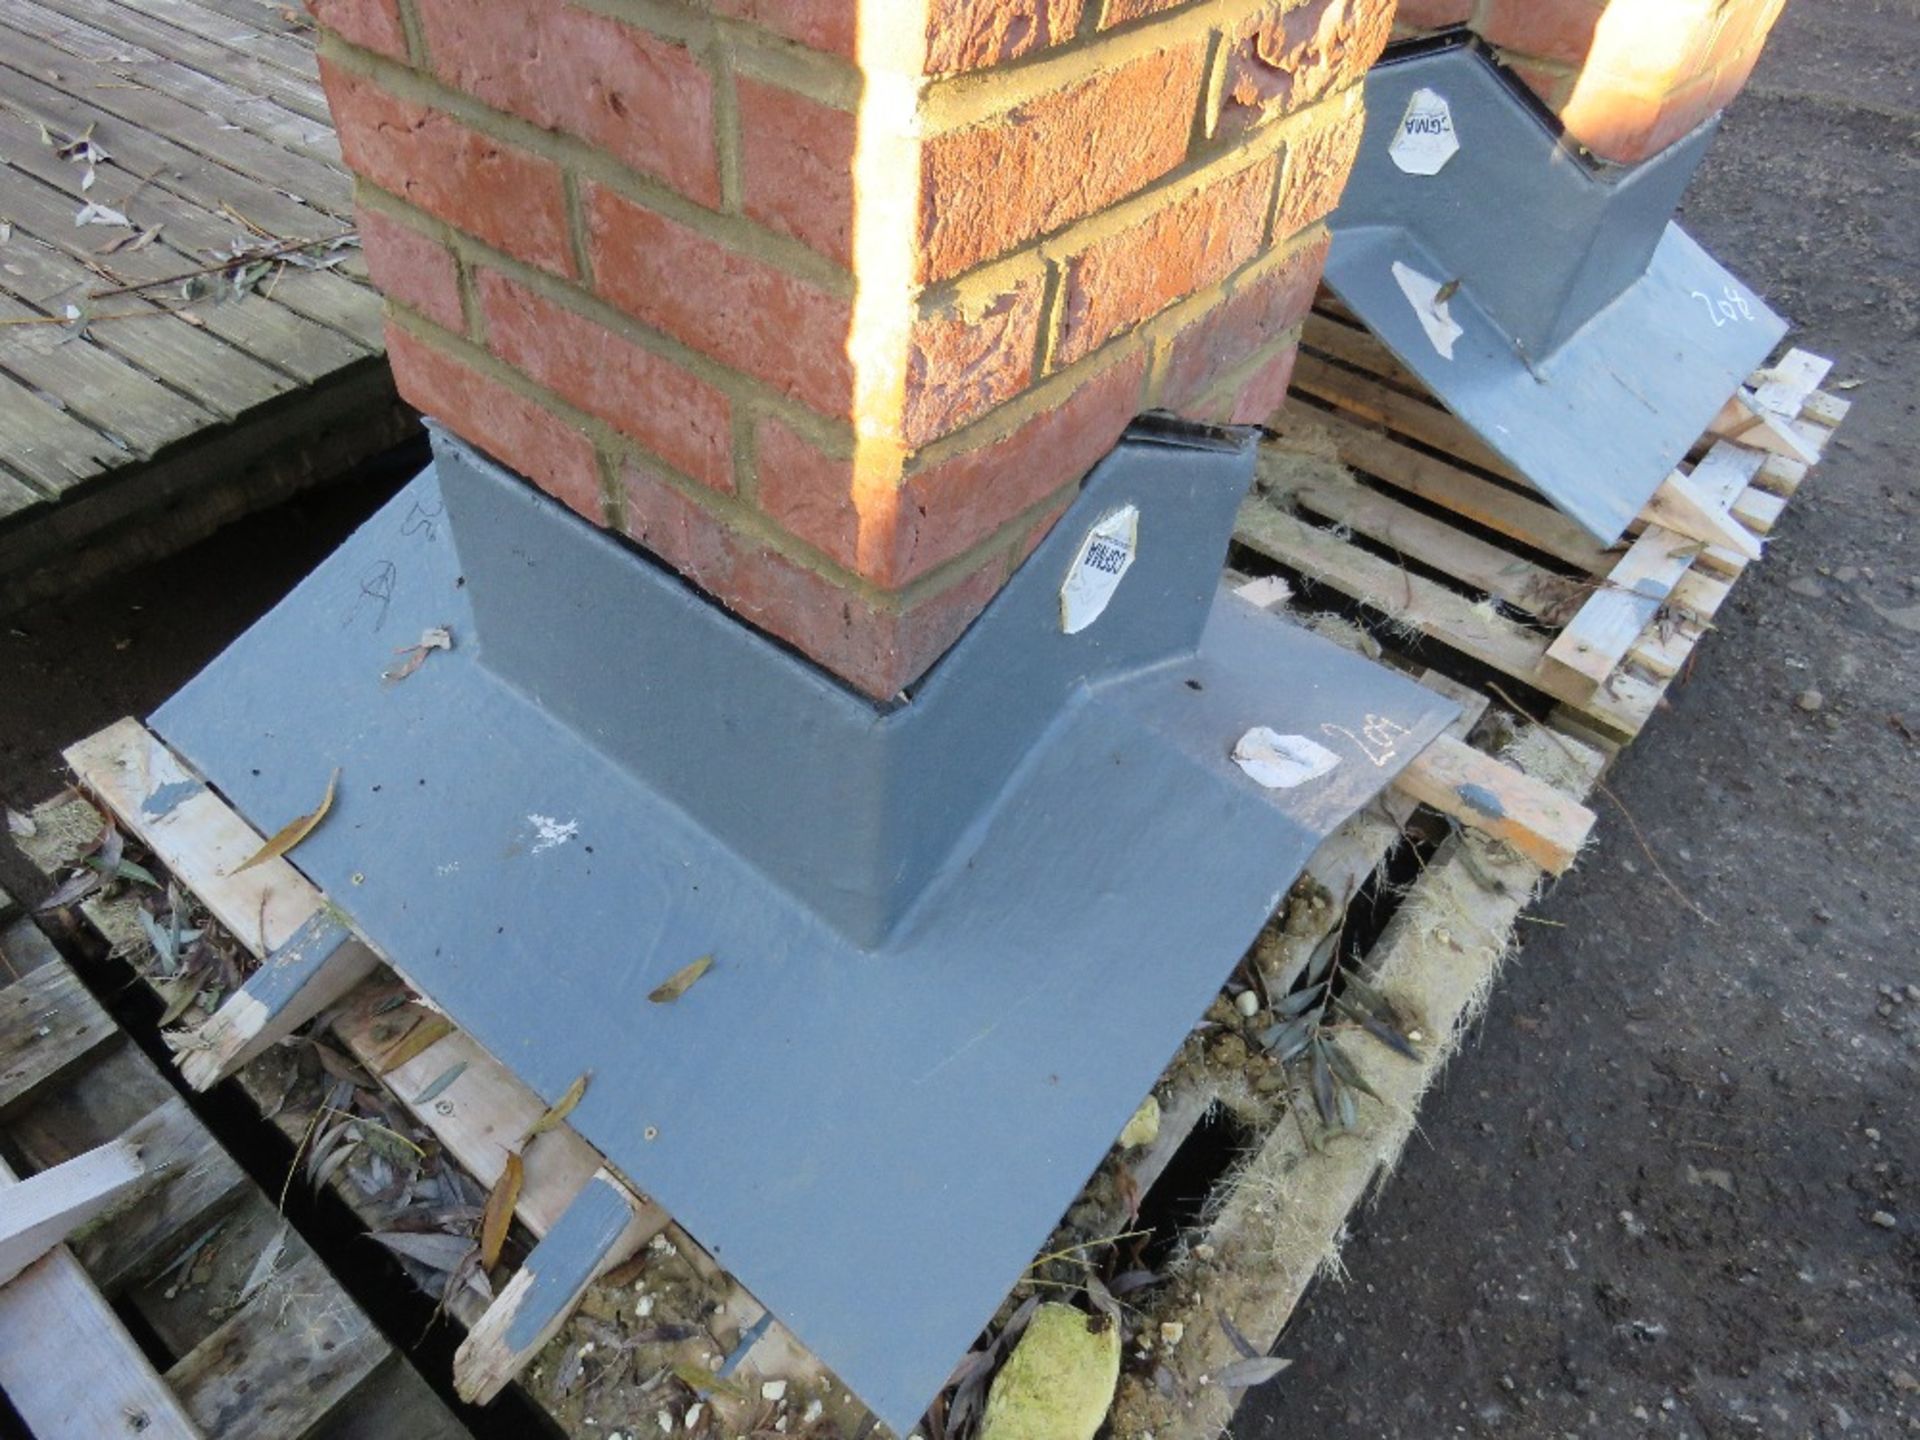 CGFMA FIBRE GLASS CHIMNEY STACK. GRP CENTRE AND BASE WITH REAL BRICK FACING. BELIEVED TO BE 25 DEGRE - Image 3 of 3